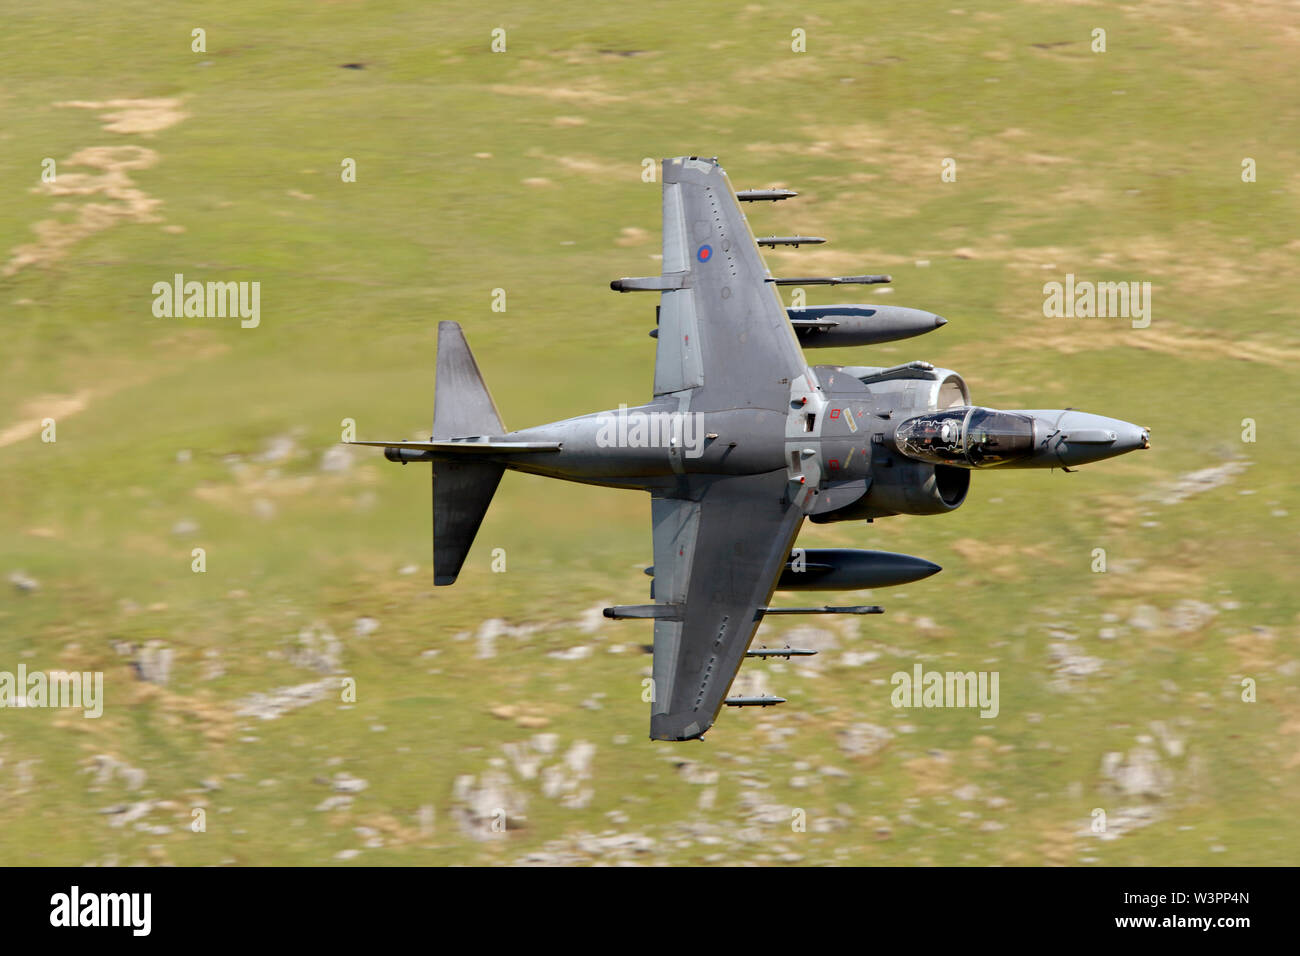 BAe Harrier GR9 ZD379 4 Sqn RAF Cottesmore low-level in the Welsh military training area LFA7 known as the Mach Loop, Dolgellau, Wales. Stock Photo